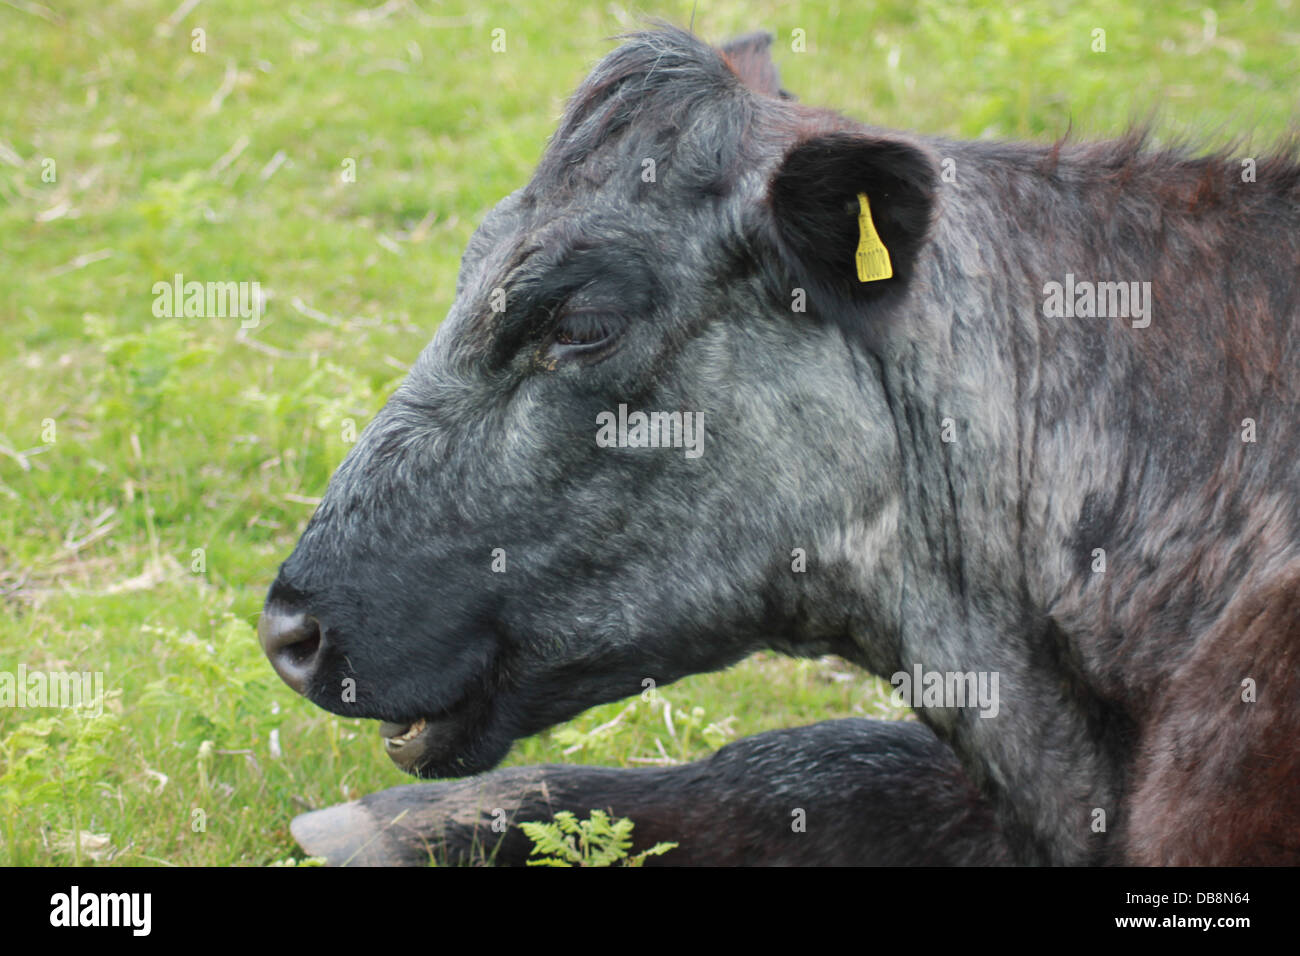 An old  Dartmoor cow resting Stock Photo